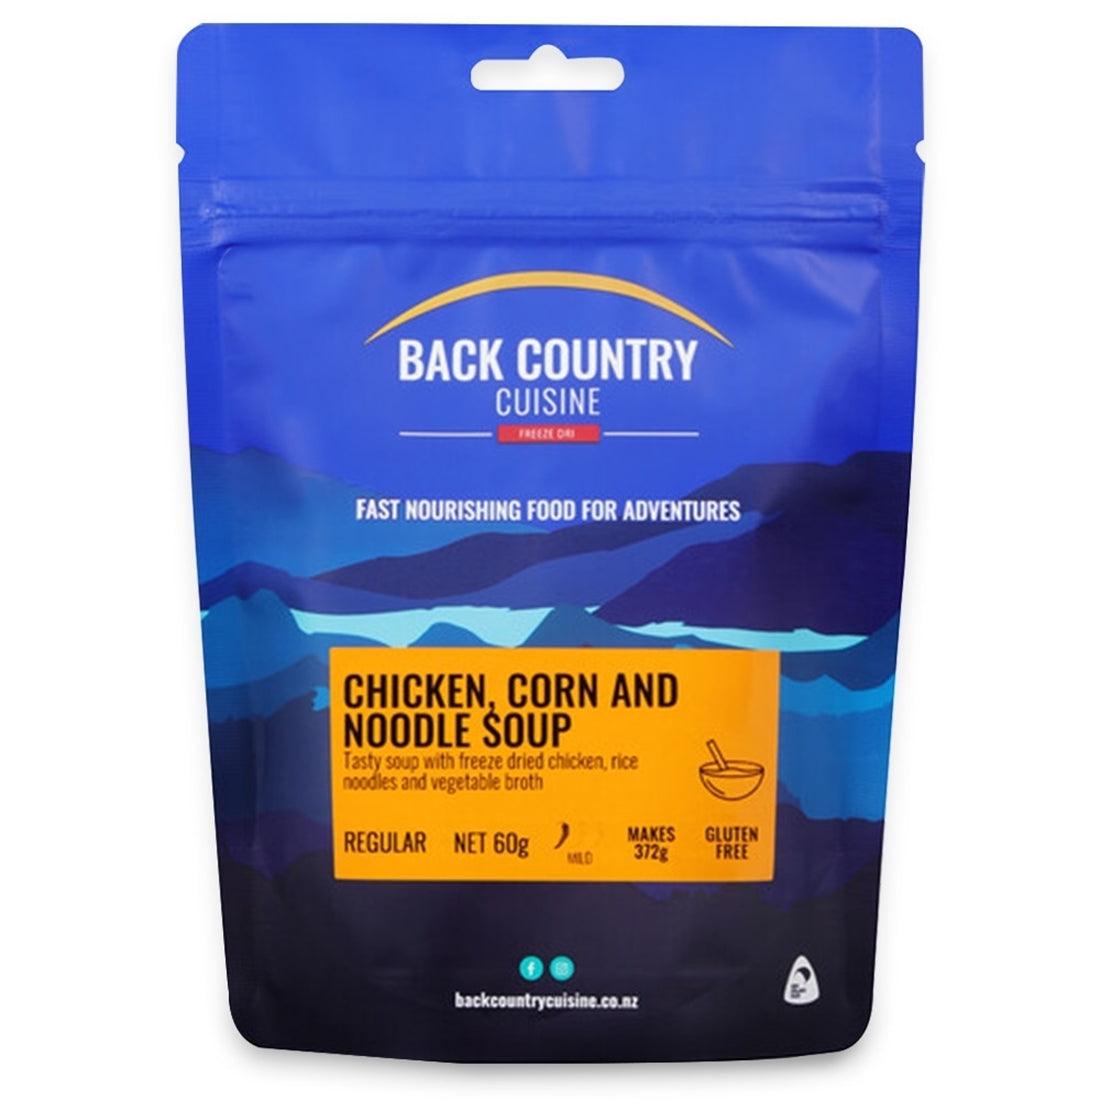 BACK COUNTRY CHICKEN CORN AND NOODLE SOUP - Horizon Leisure